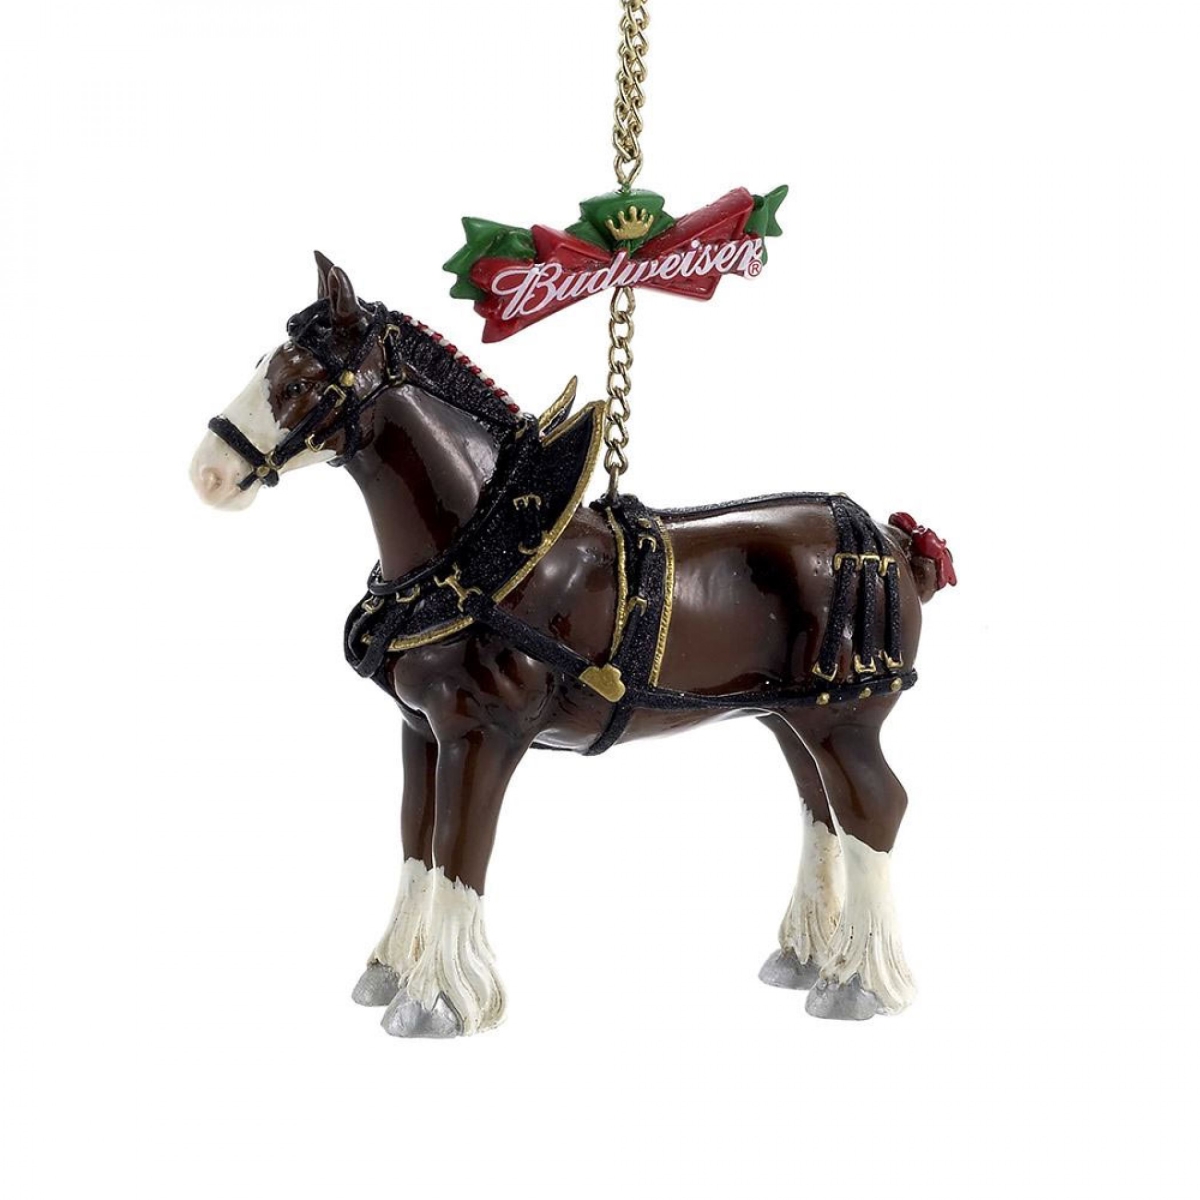 49874  Beer Clydesdale Holiday Ornament -  Budweiser